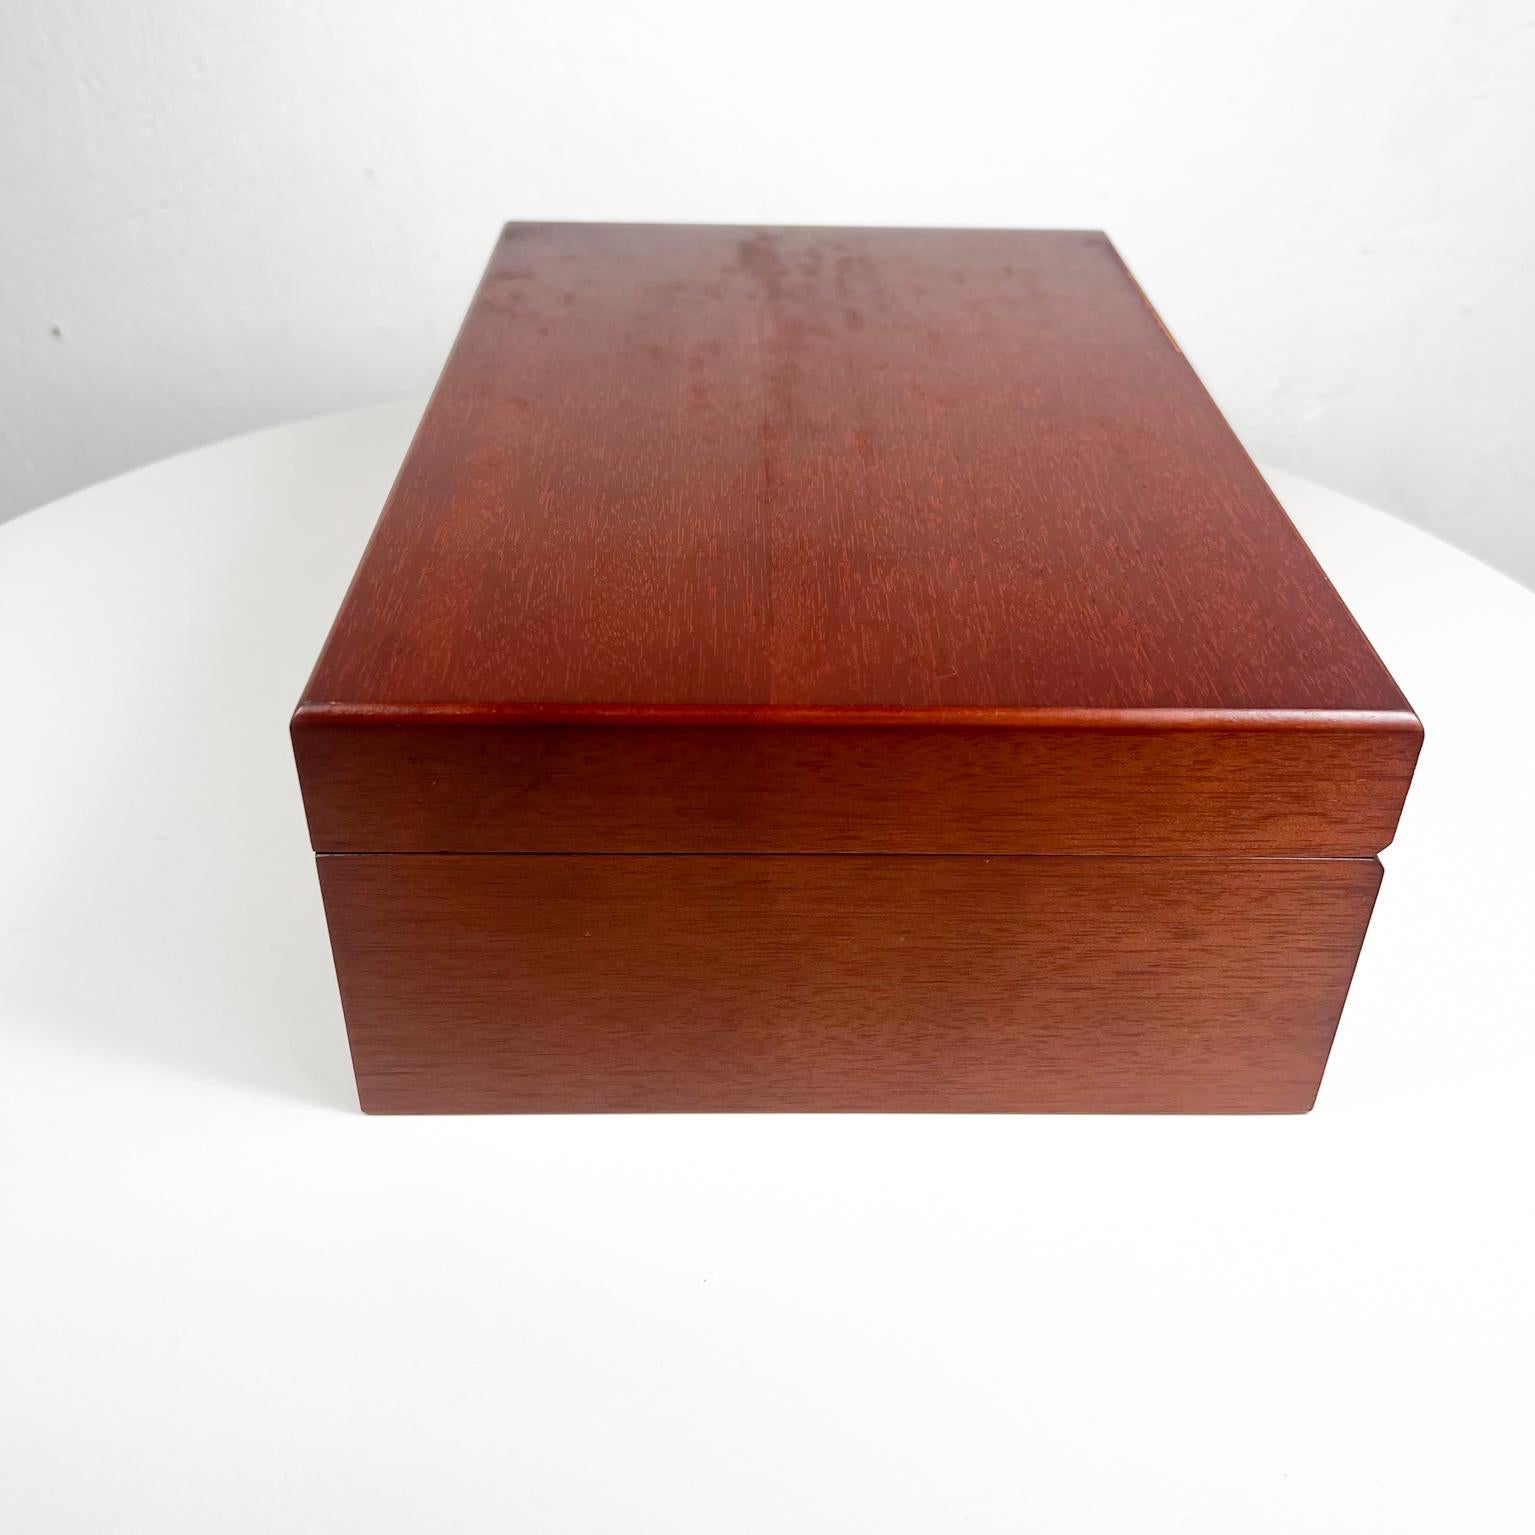 1950s Modern Wood Jewelry Box Felt Sectioned Interior Compartments 5